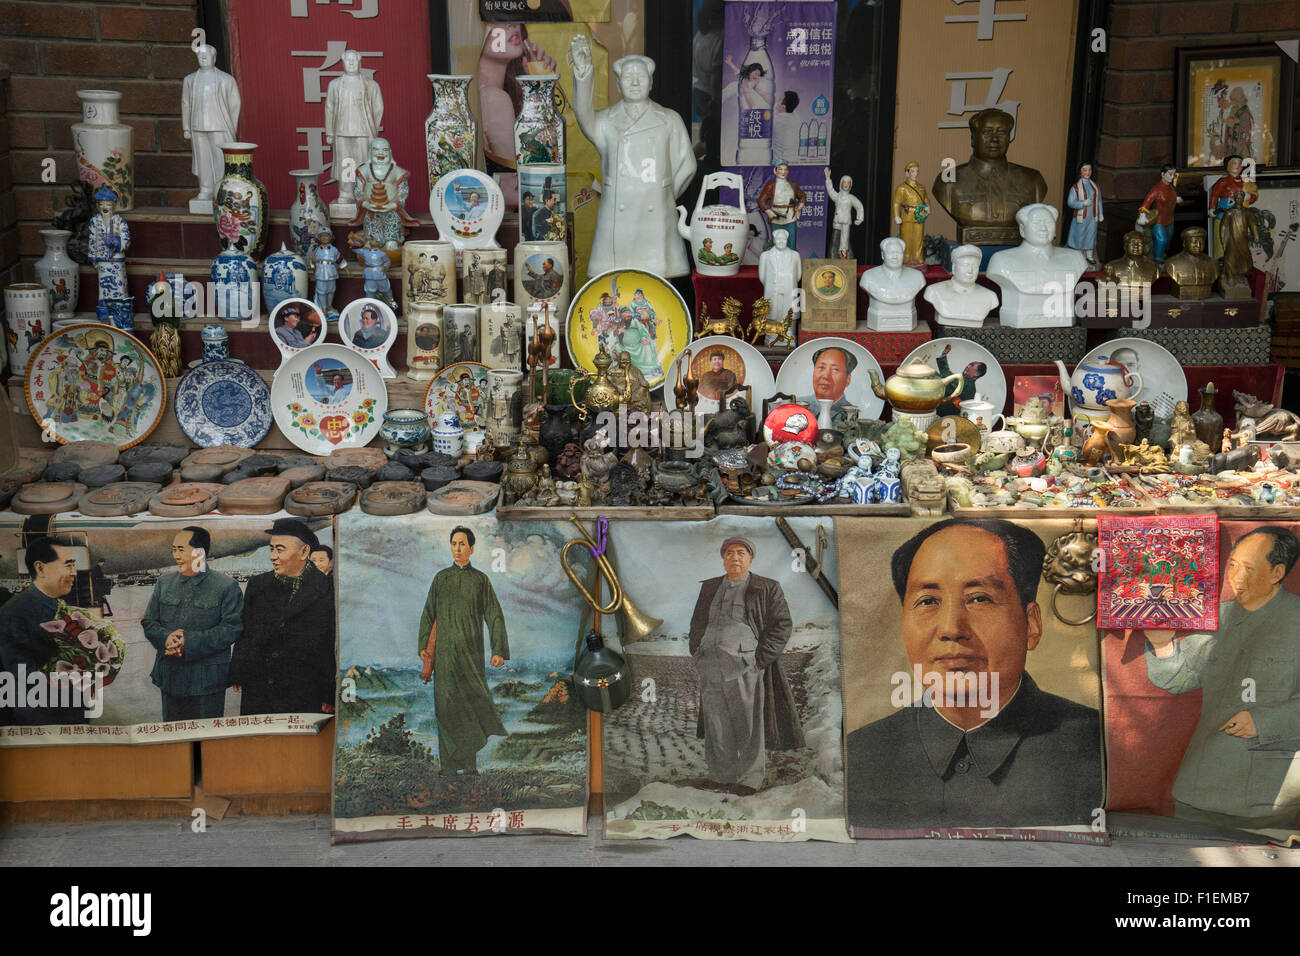 Souvenirs at the tomb site of Qin Shi Huang, the first Emperor of China in Xi'an, Shaanxi, China Stock Photo